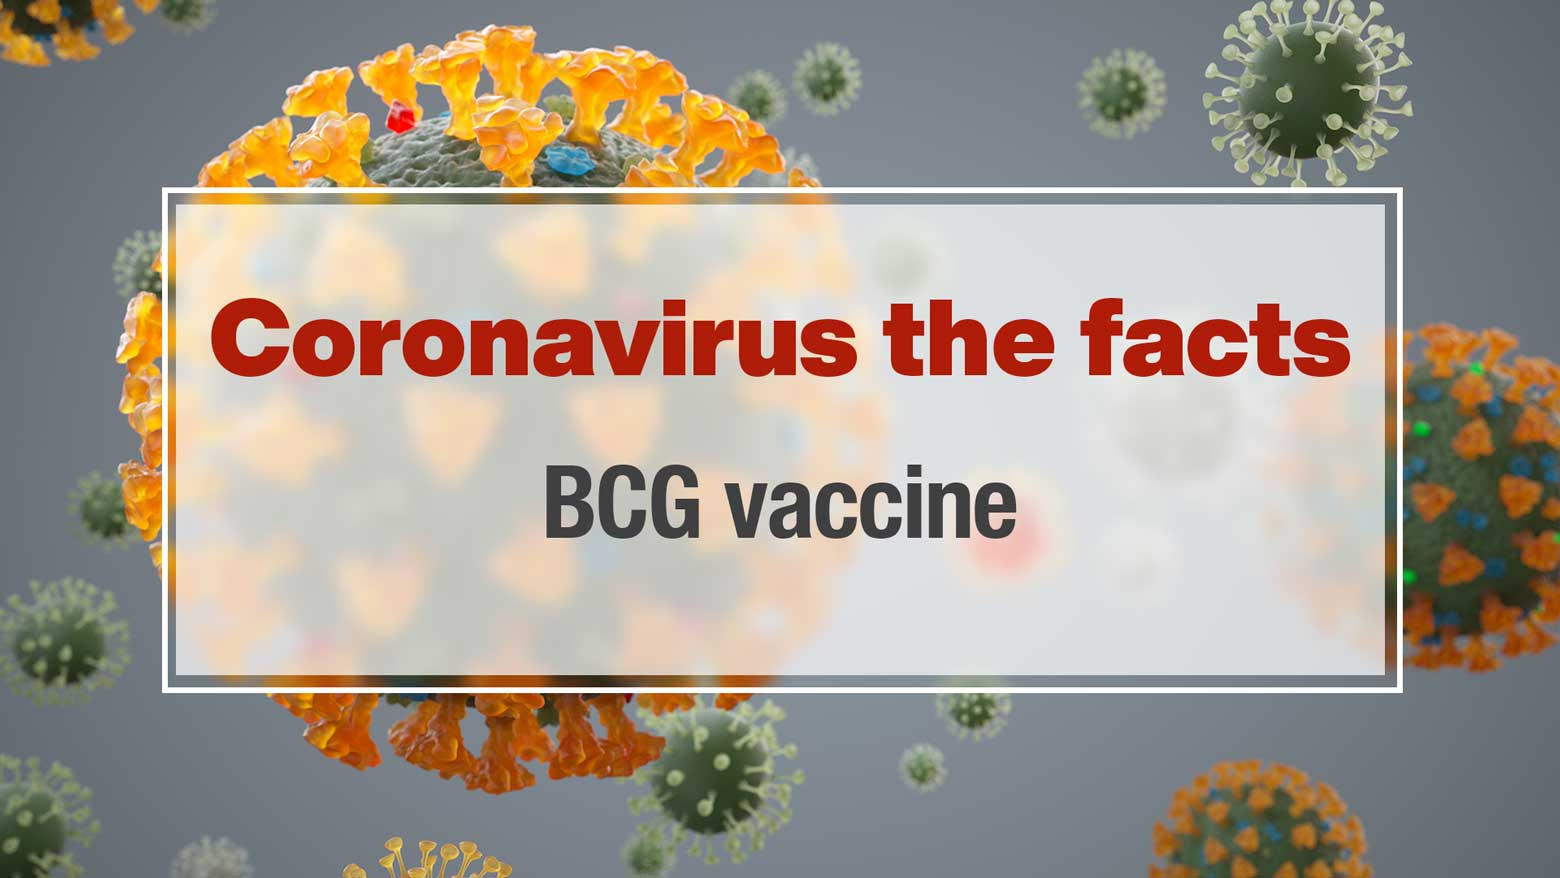 Is there any relationship between the BCG vaccine and the coronavirus death rate?